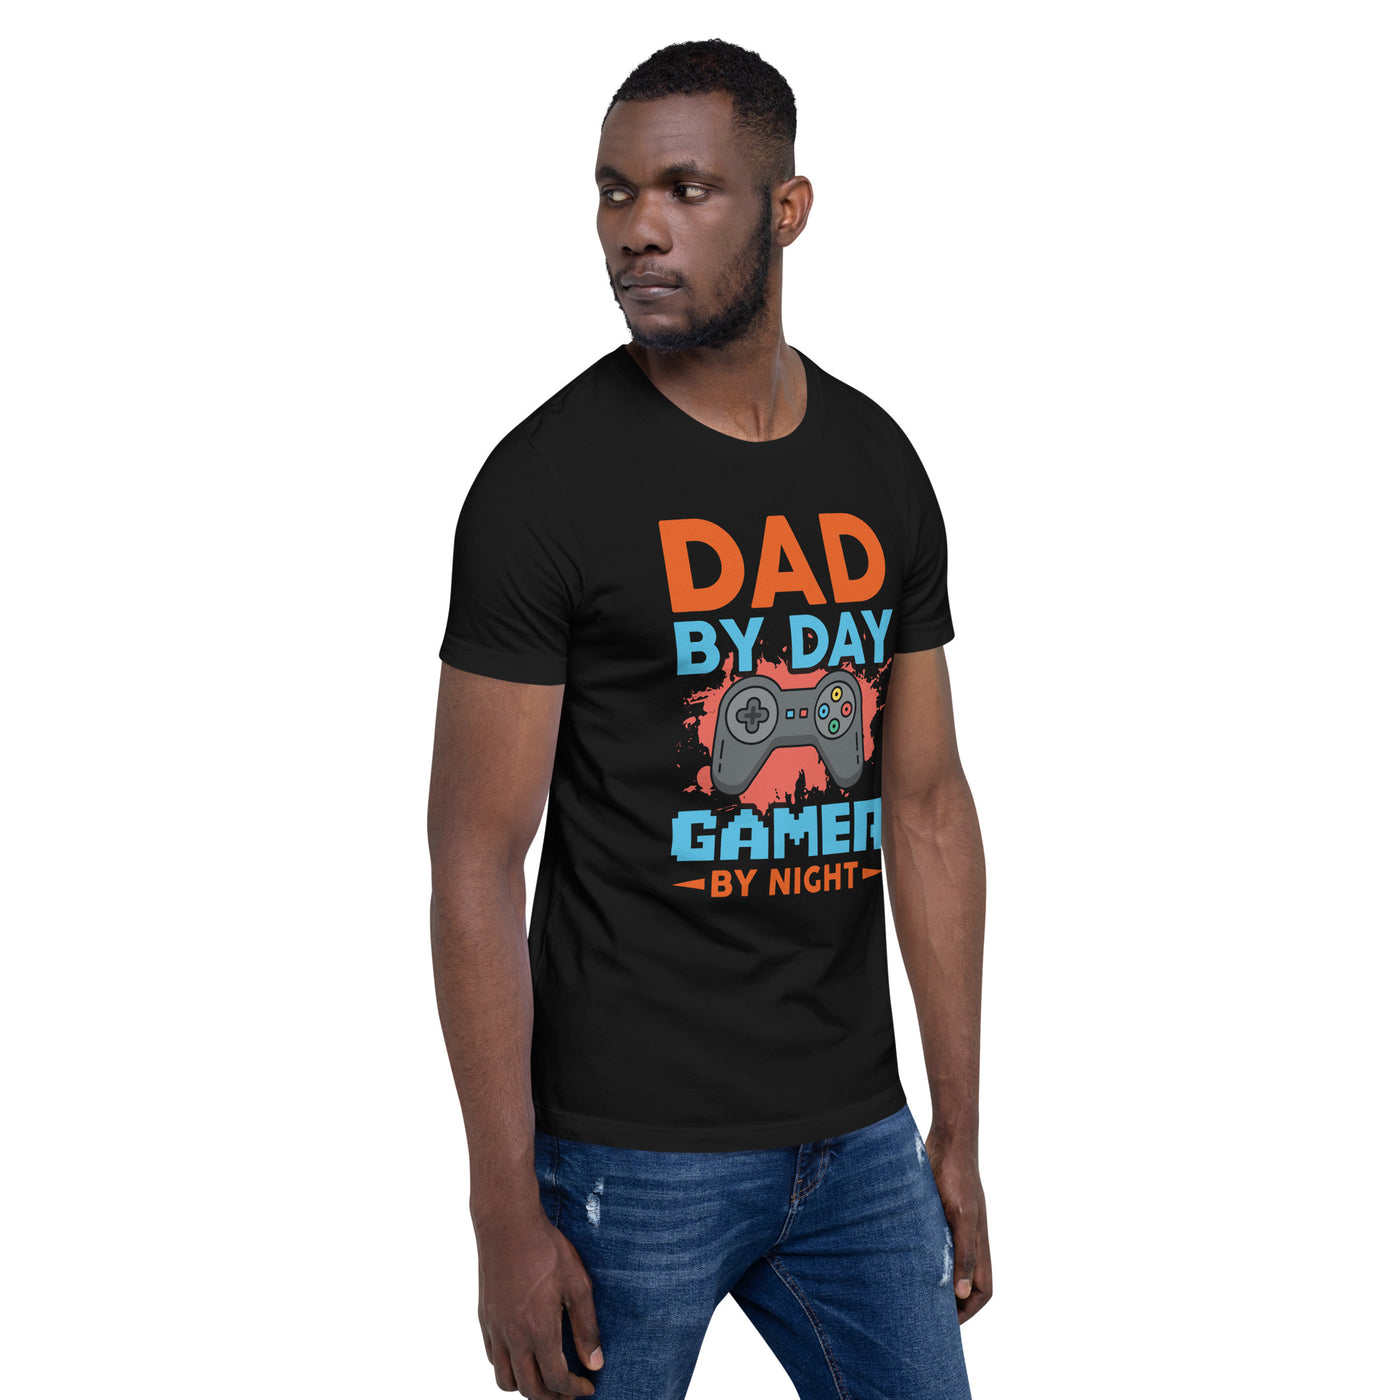 Dad by Day, Gamer by Night - Unisex t-shirt